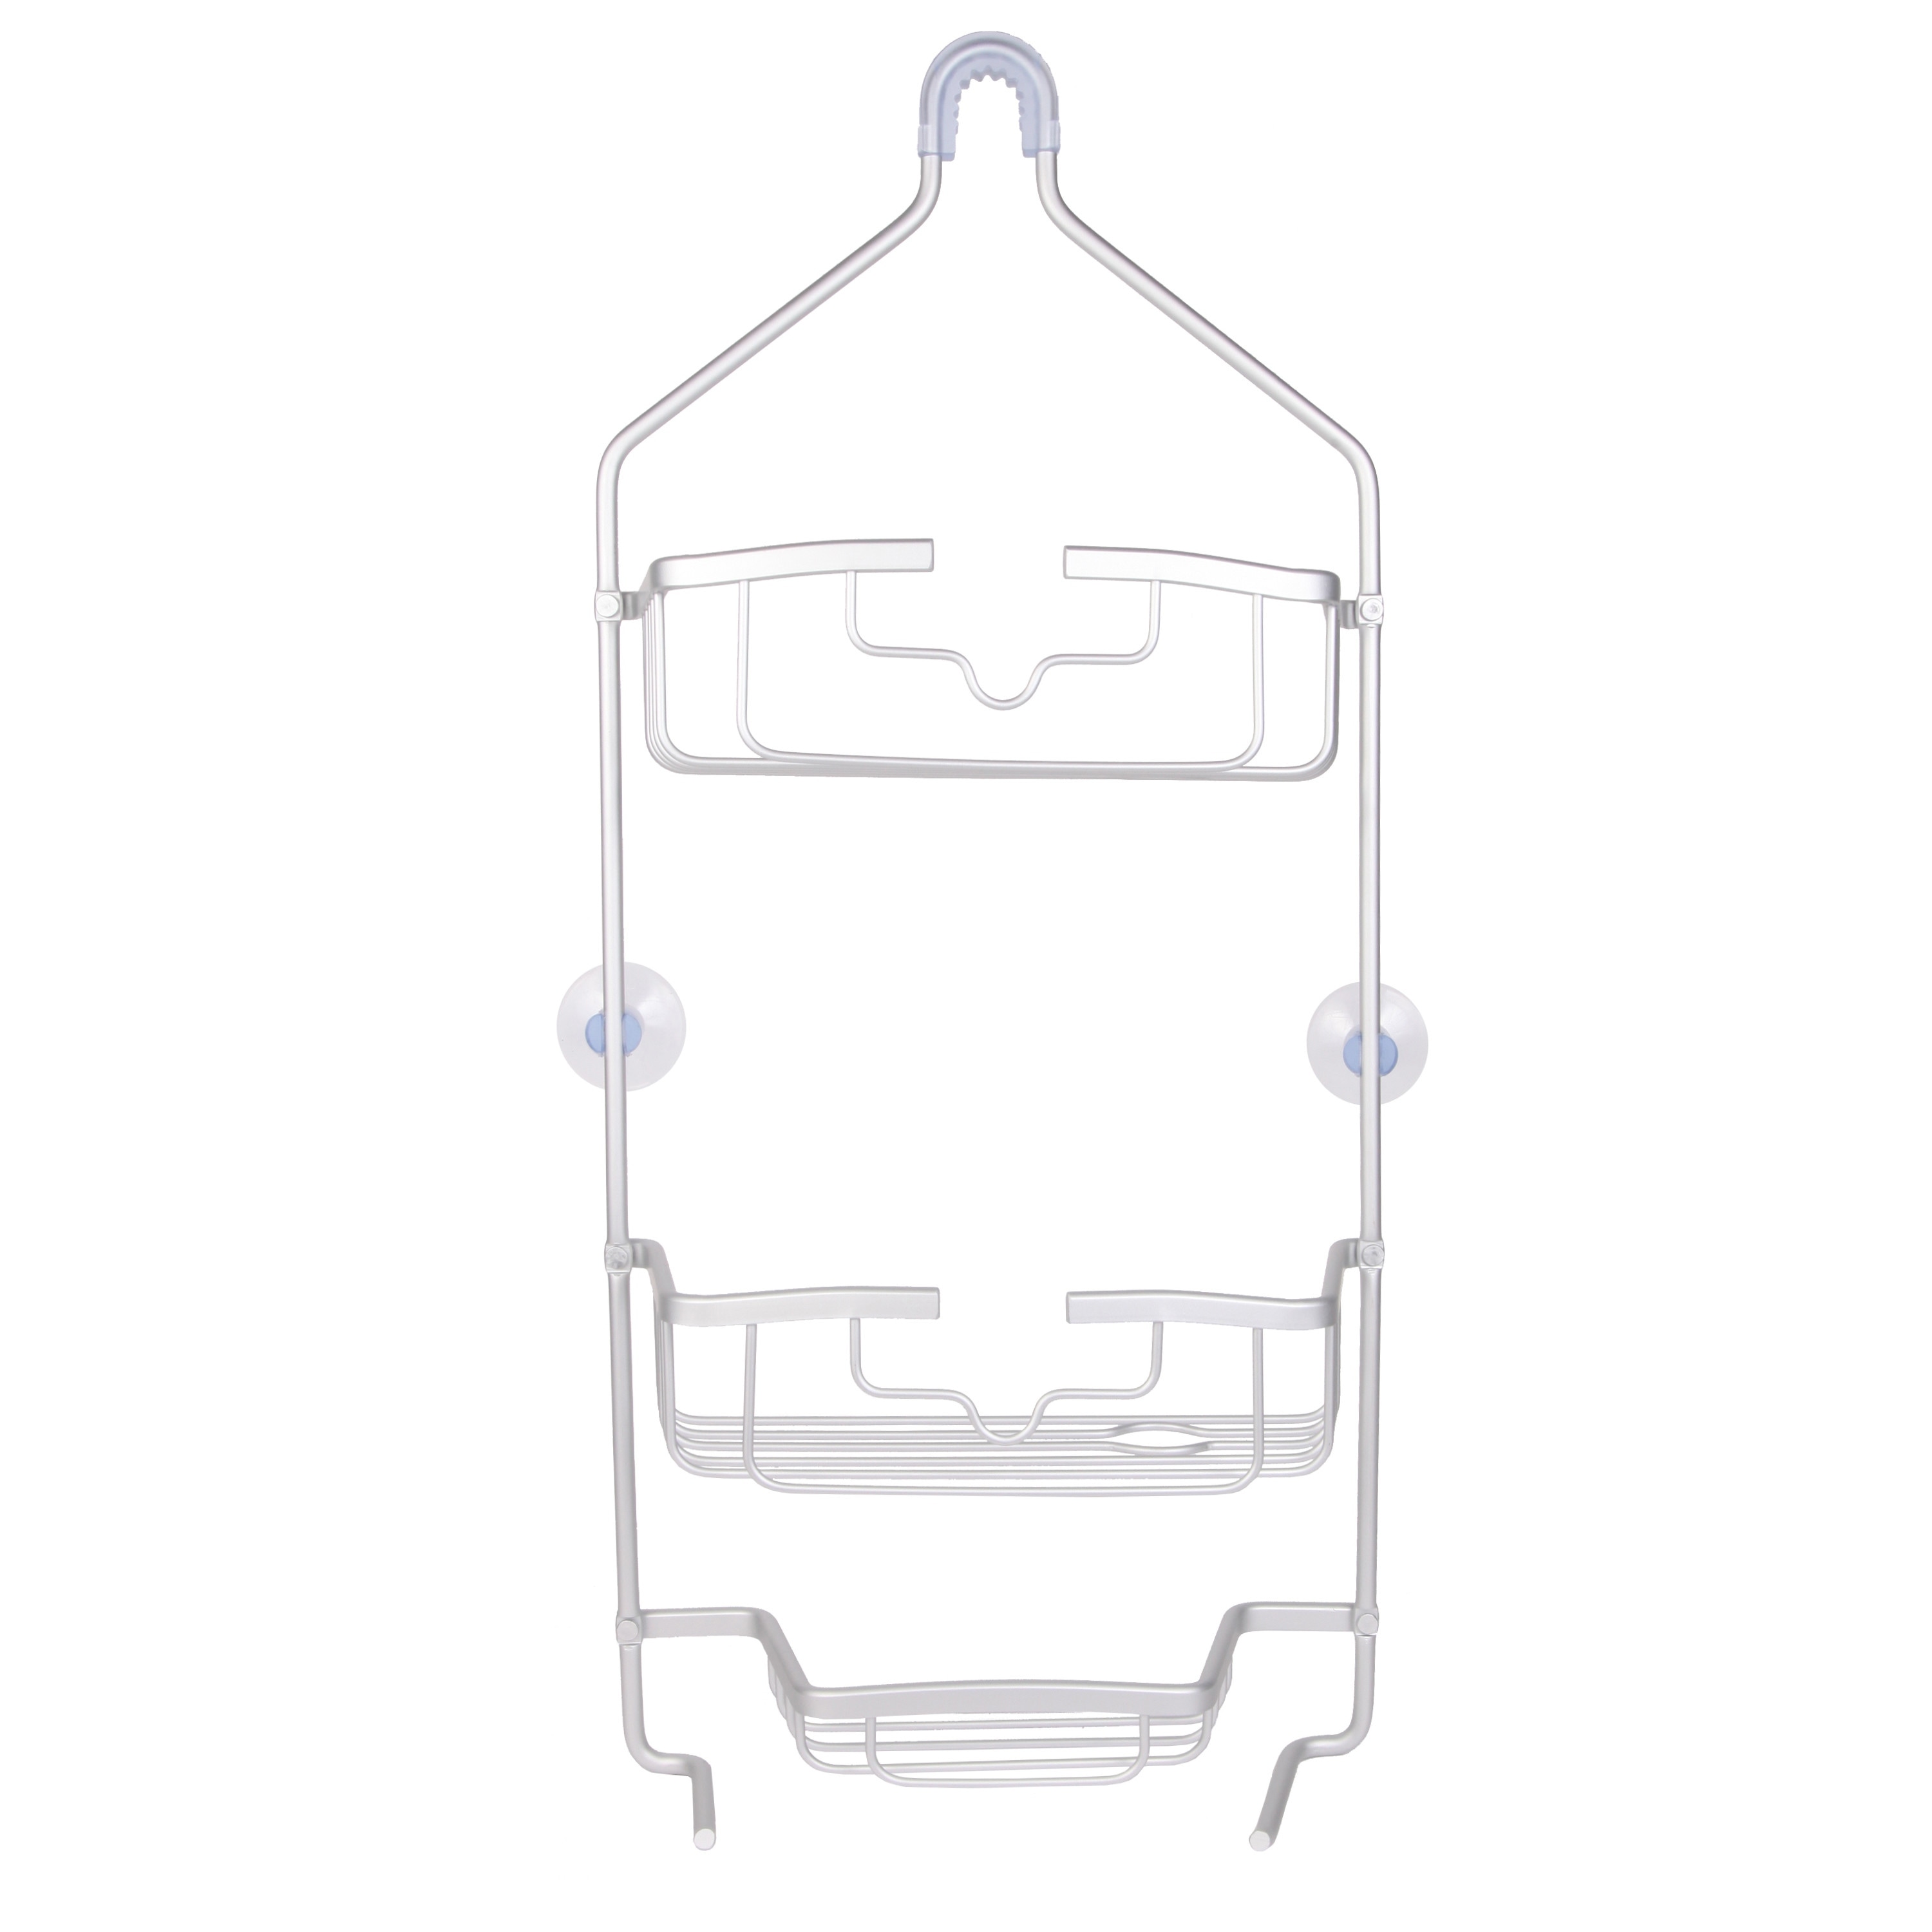 https://ak1.ostkcdn.com/images/products/is/images/direct/77082e62722624c3d218ab4133a3de4b1abce283/Rust-Proof-Heavy-Duty-Aluminum-3-Tier-Hanging-Shower-Caddy-with-Suction-Cups-and-Two-Razor-Holders.jpg